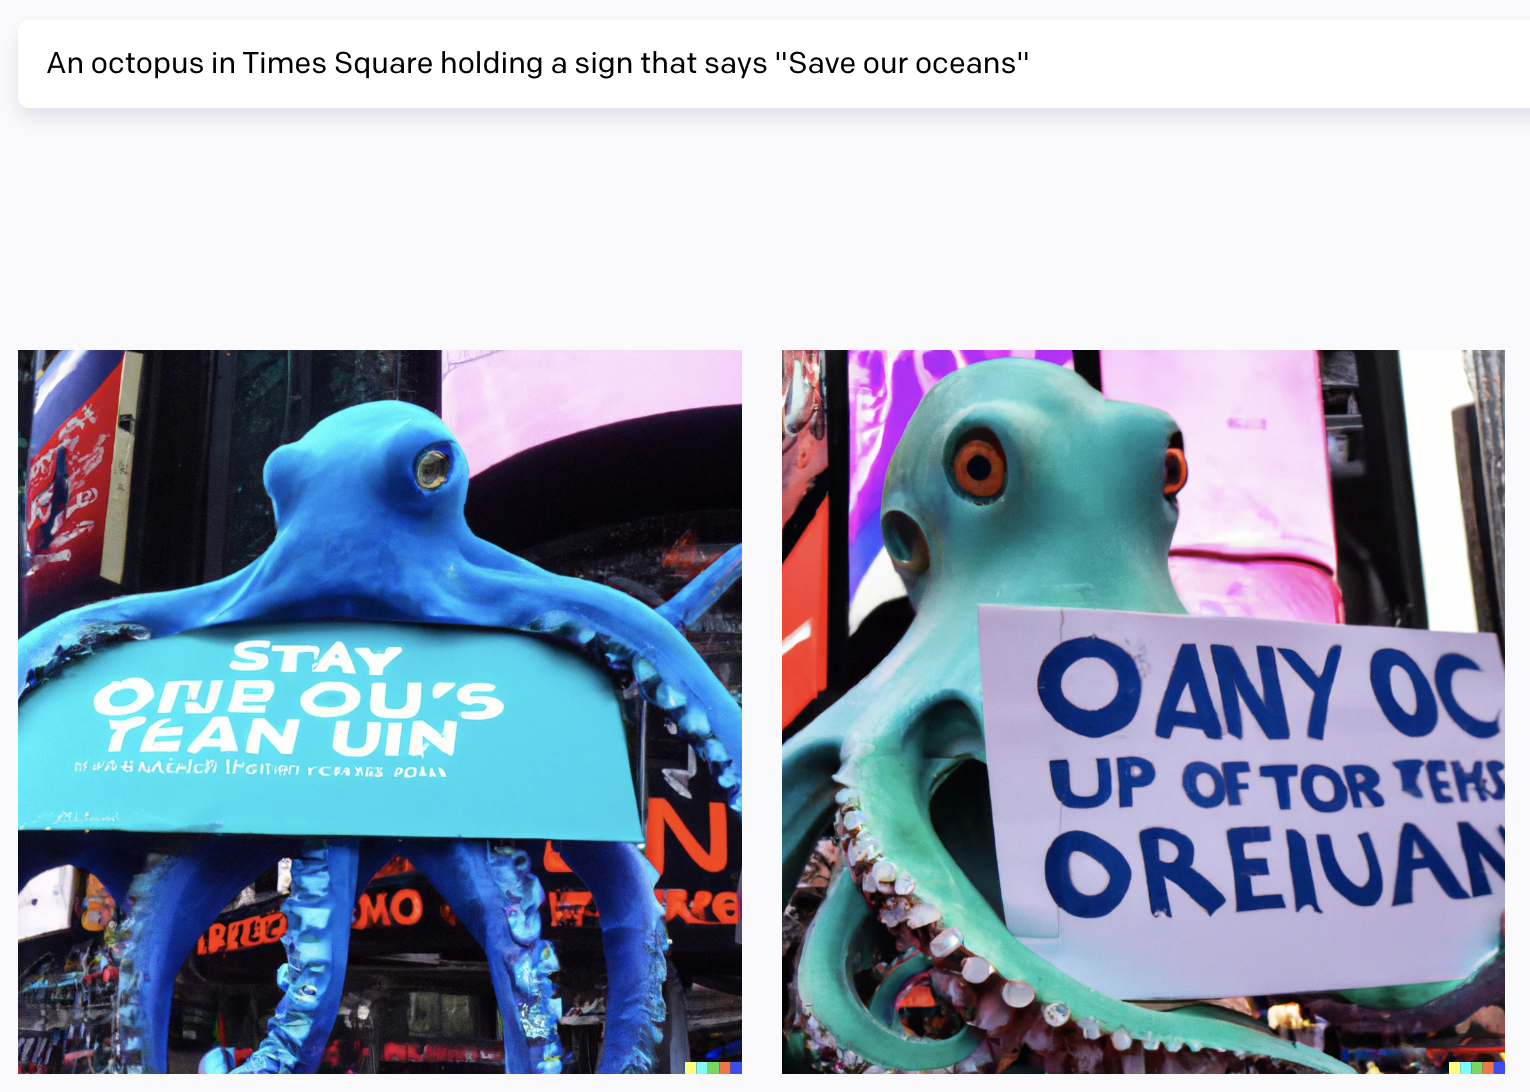 DALL-E 2 results for “An octopus in Times Square holding a sign that says - Save our oceans" prompt